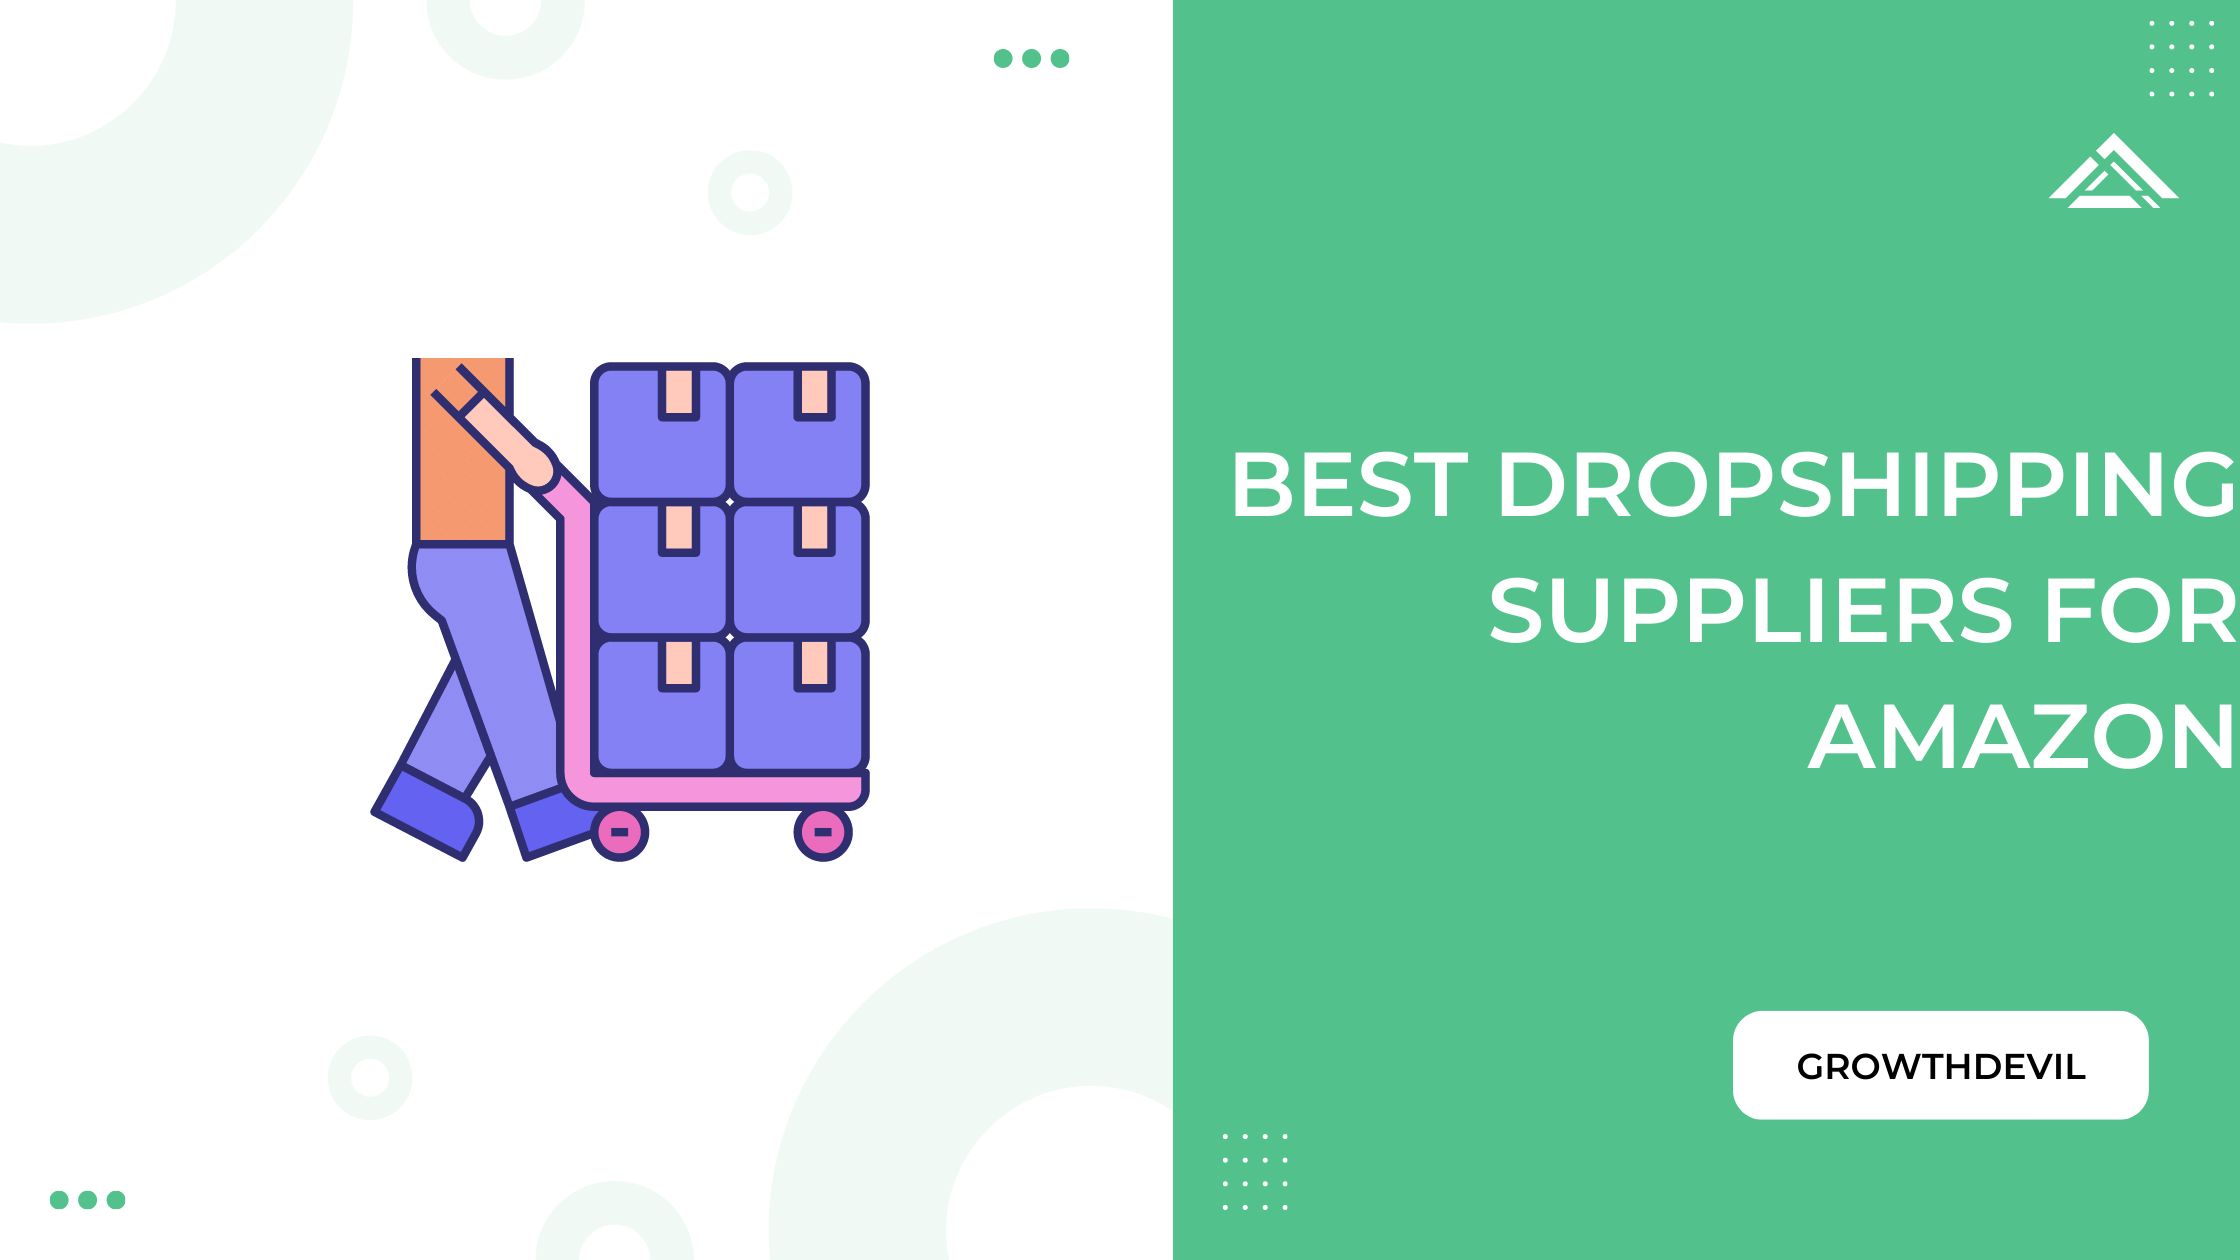 Best Dropshipping Suppliers For Amazon - GrowthDevil